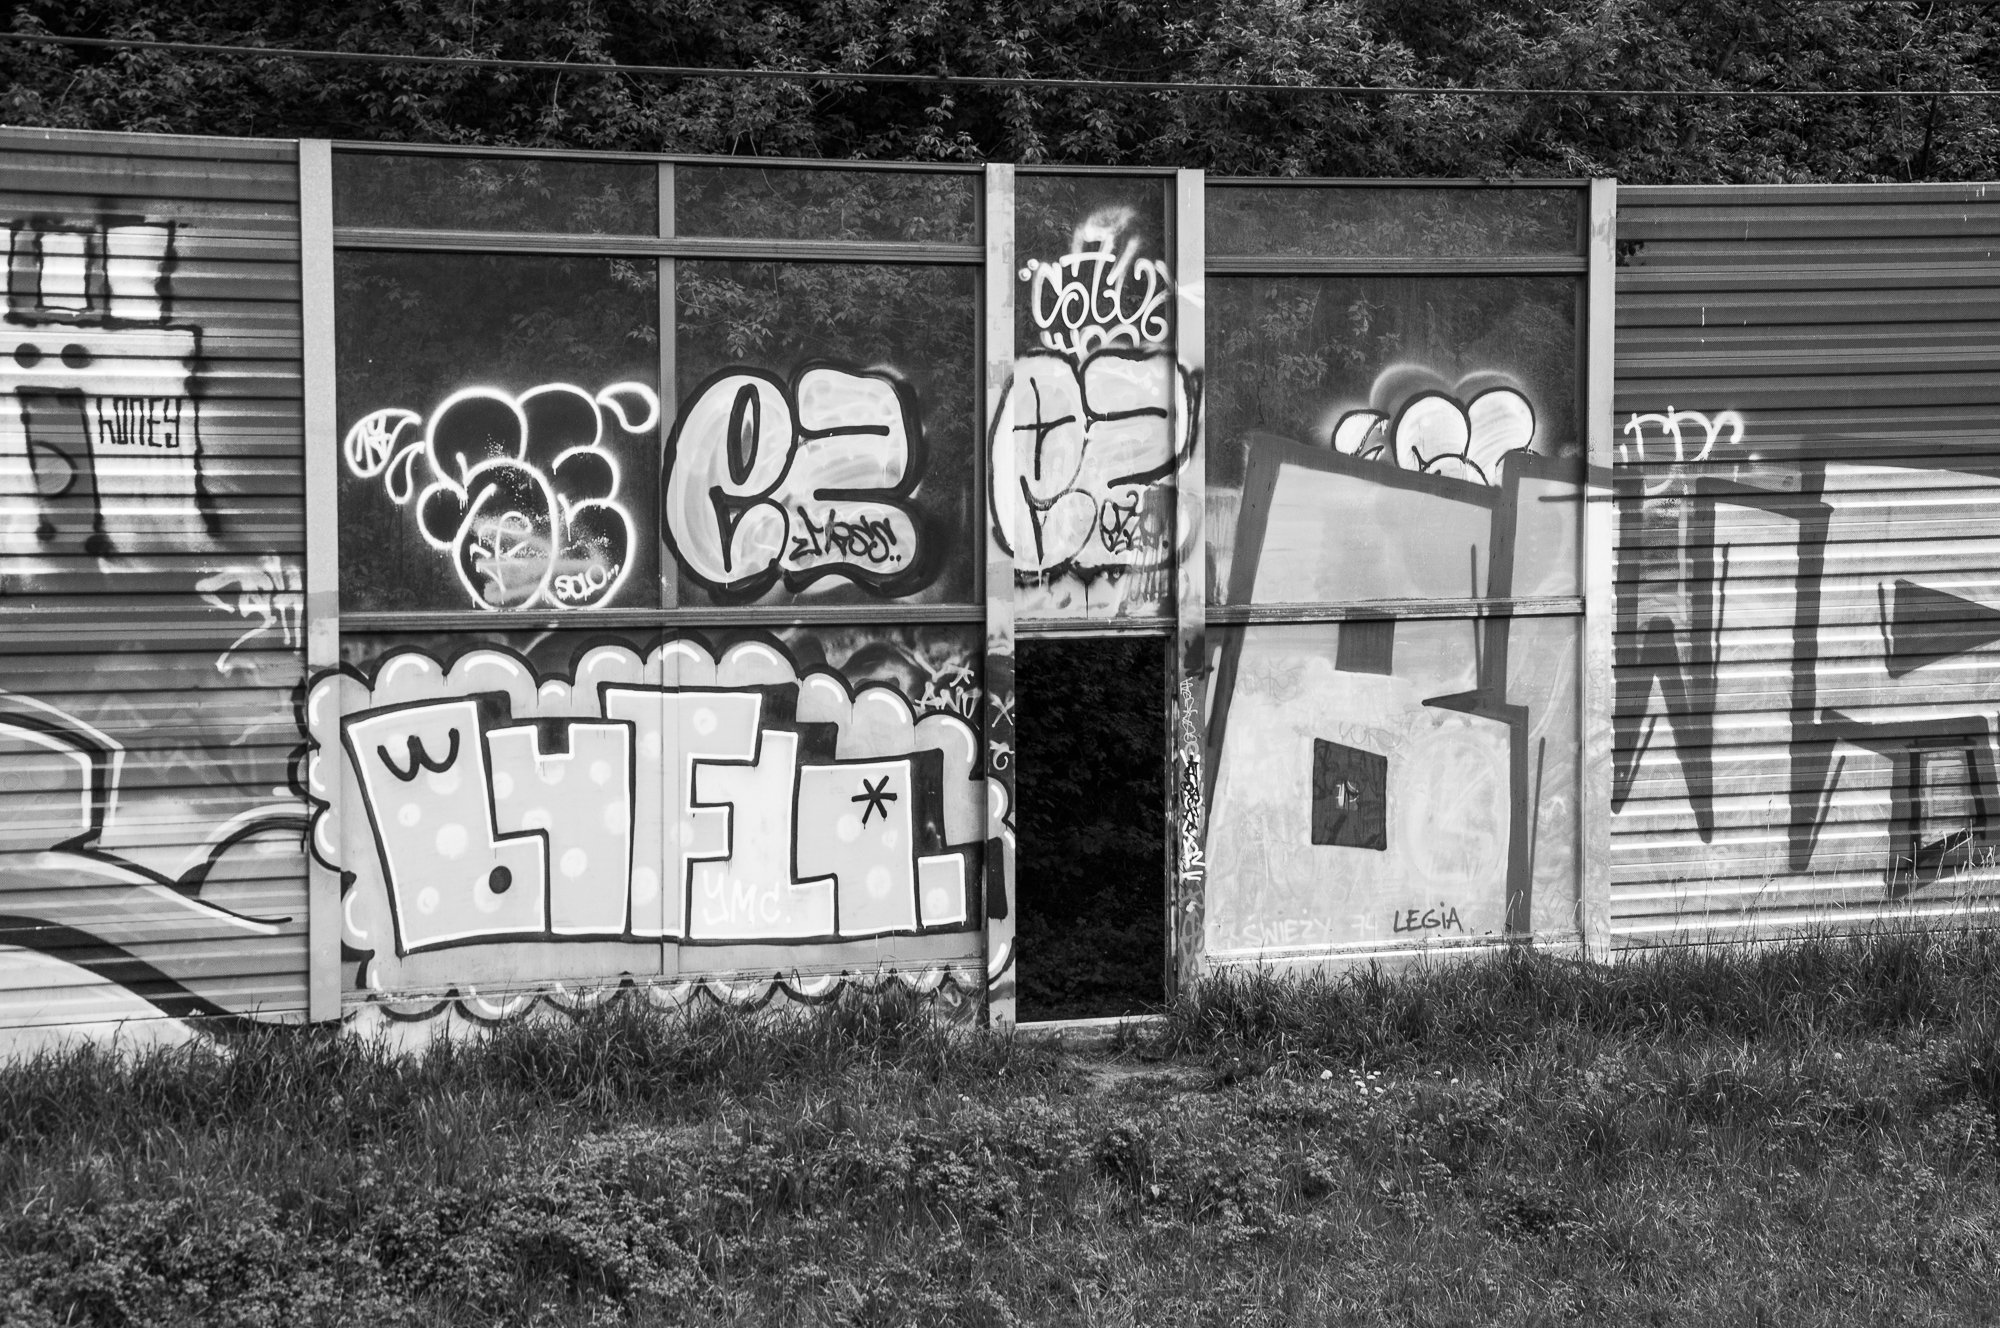 Adam Mazek Photography 2021. Warsaw Street Photography. Post: "Where is the center of the Universe?” Minimalism. Door. Graffiti.